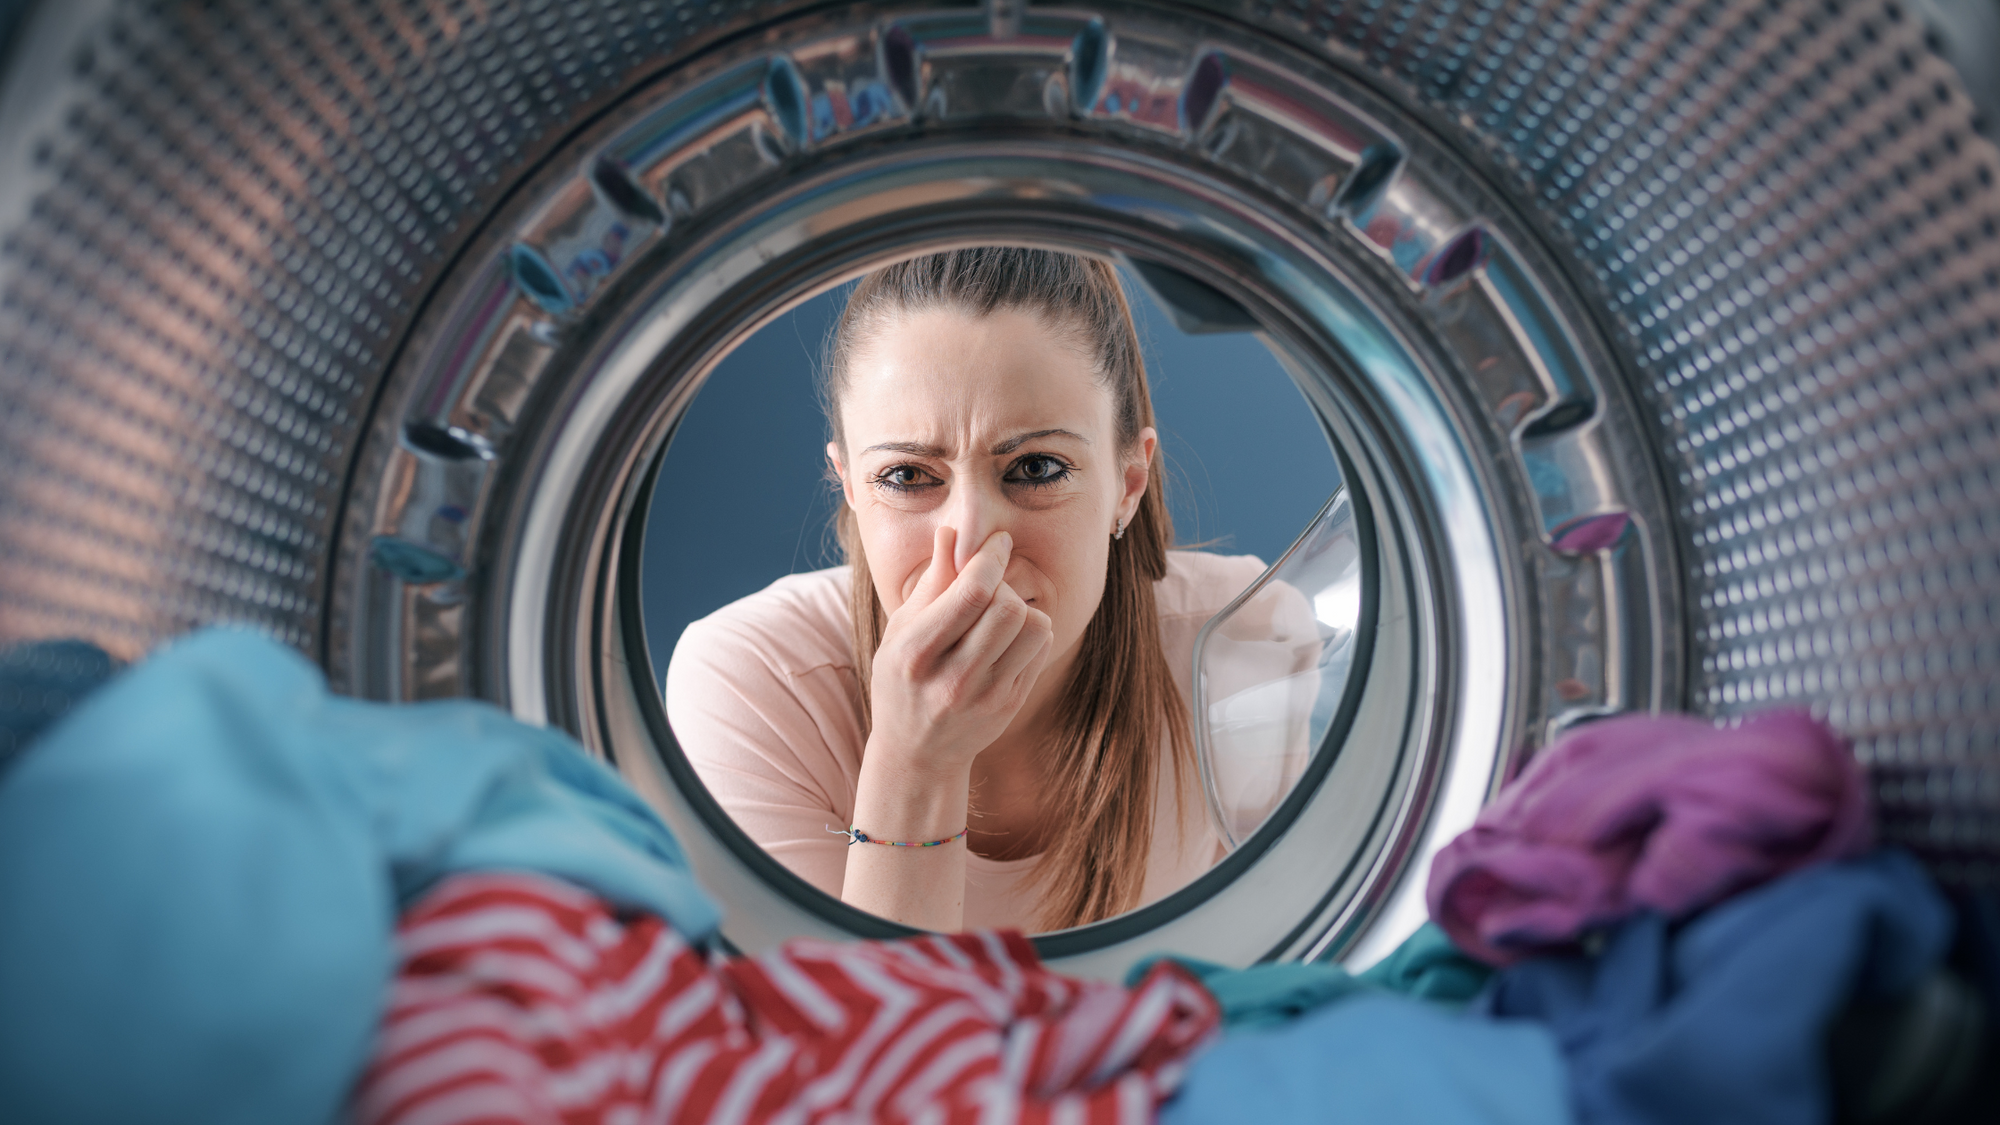 Revitalise Your Washing Machine with Vamoosh: The Ultimate Deep Cleaning Guide